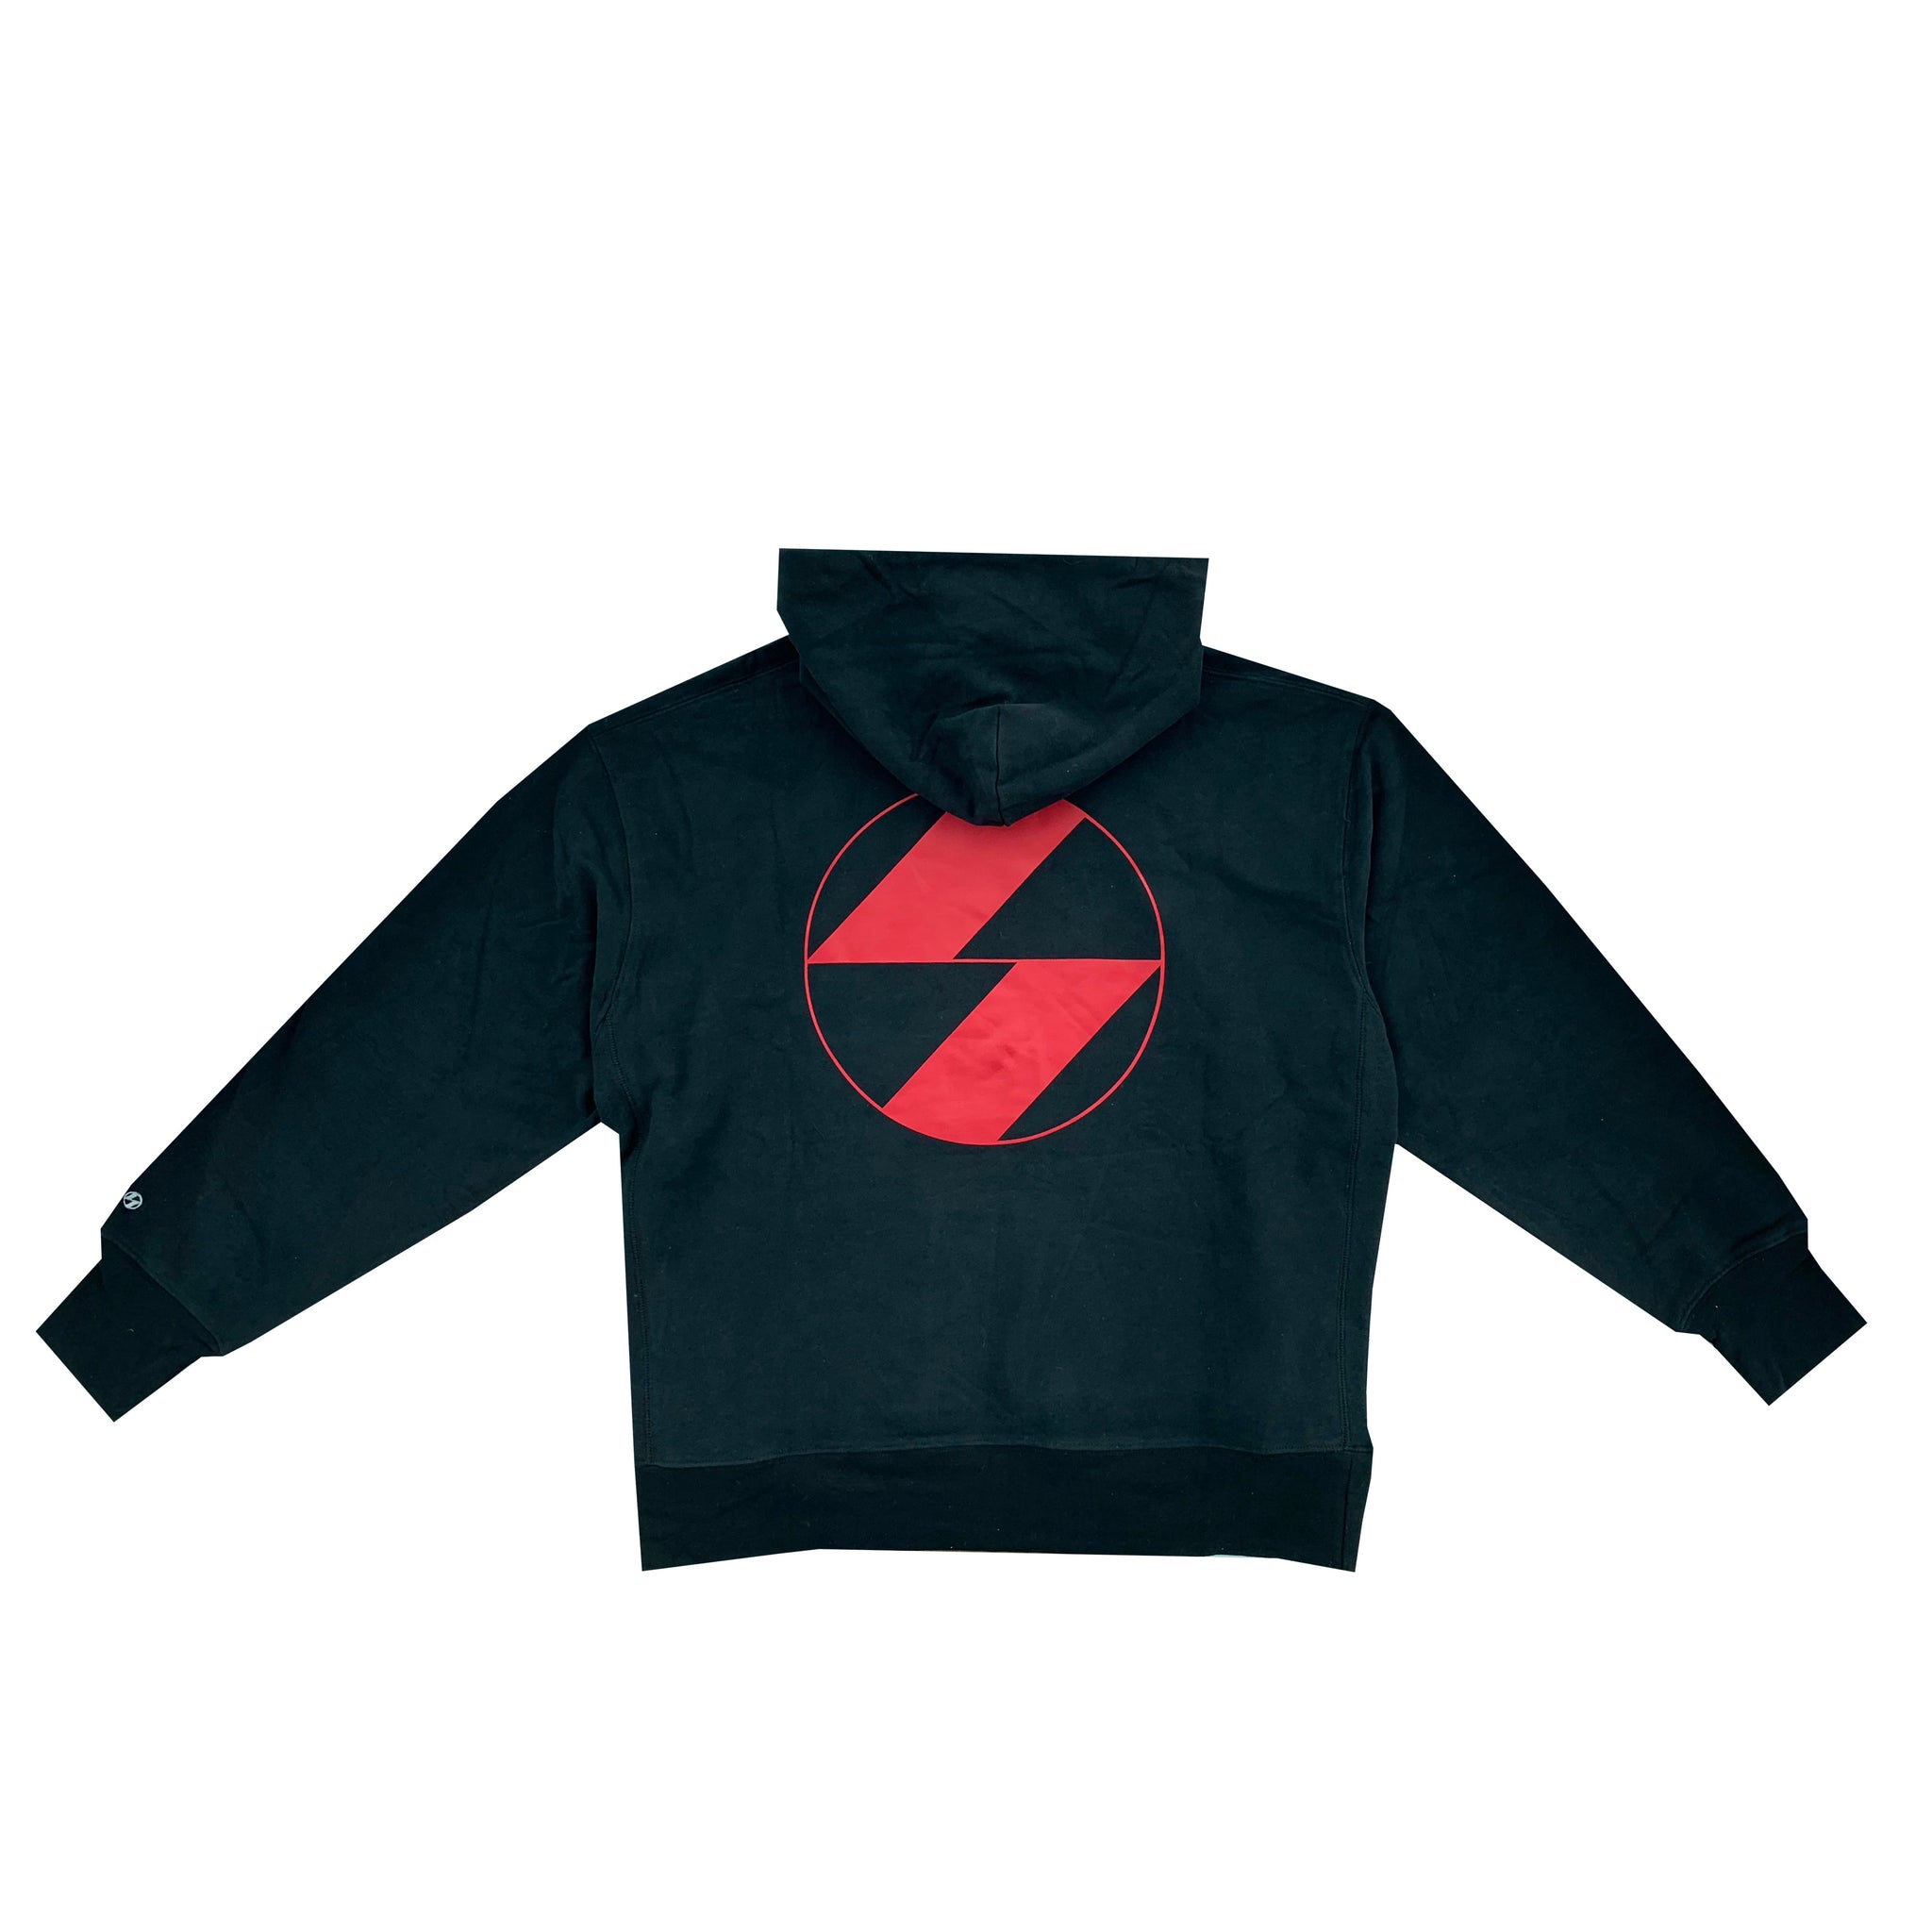 The Salvages Logo Hoodie - Made In USA